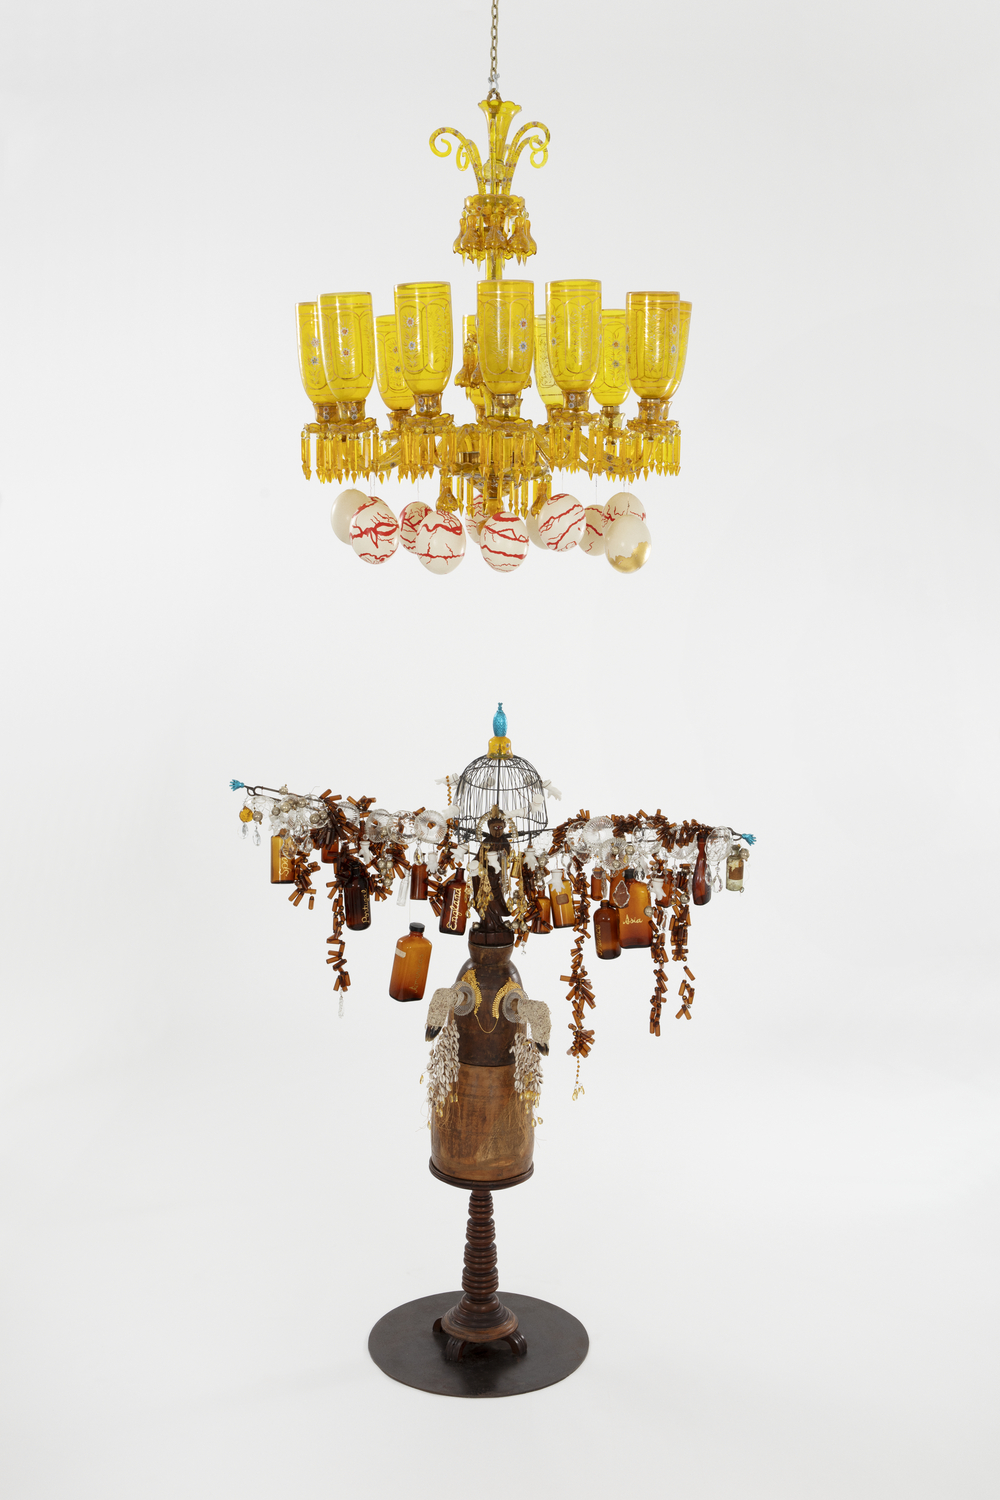 Rina Banerjee, Lady of Commerce, 2012; Hand-painted, leaded glass chandelier, wood figurine, vintage glass bottles, chandelier ornaments, birdcage, steel, wood pedestal, lace, cowry shells, taxidermy deer paws, Indian marriage jewelry, ostrich eggshells, porcelain doll hands, silver leaf, gold leaf, wire, linen cord, and marble baby doll hands, 120 x 48 in. diameter; Courtesy of the artist; © Rina Banerjee; Image courtesy of the artist and Perrotin; Photo by Guillaume Ziccarelli